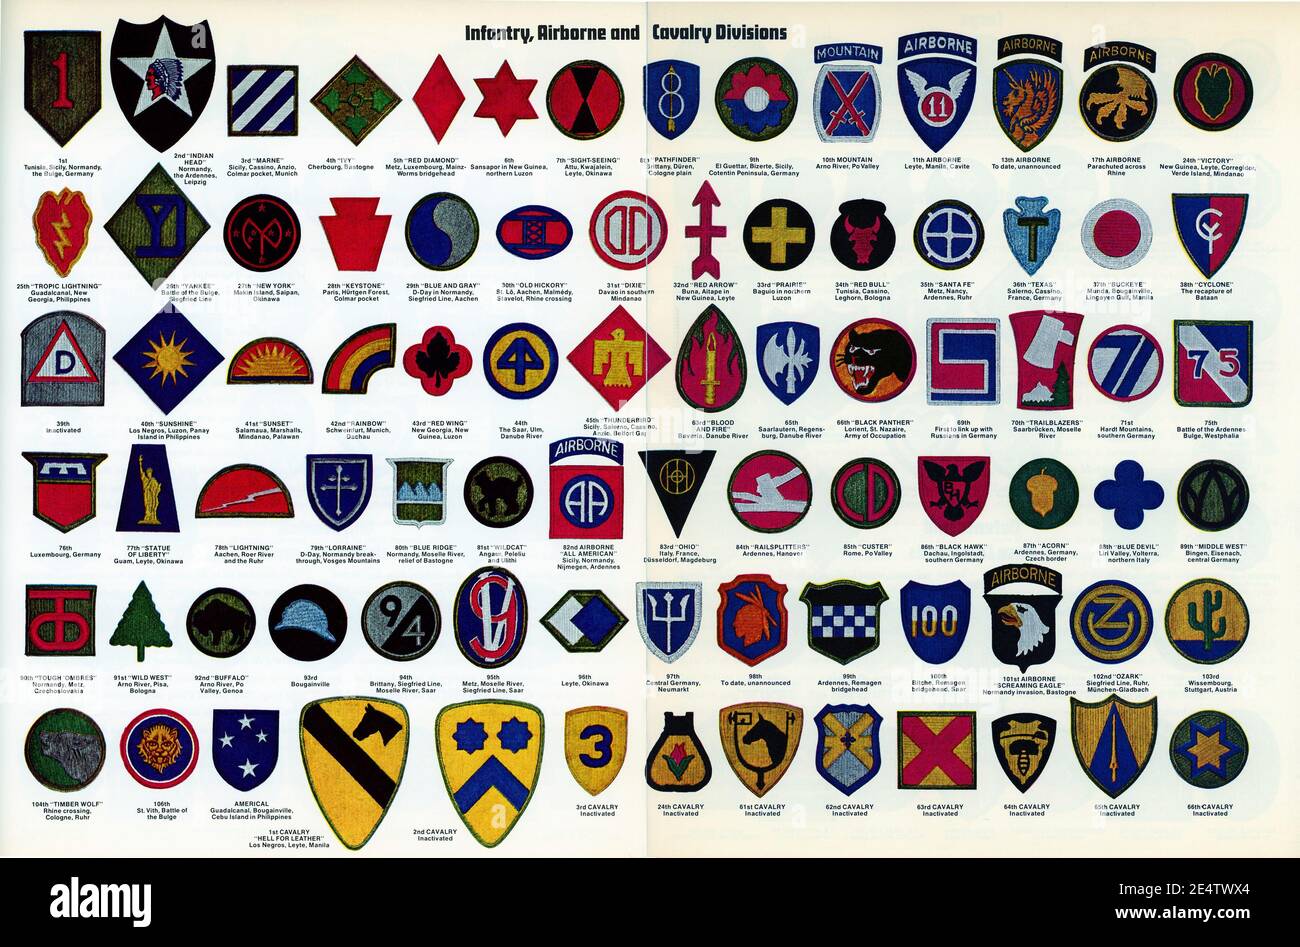 WW2 US Army patches - the Guide